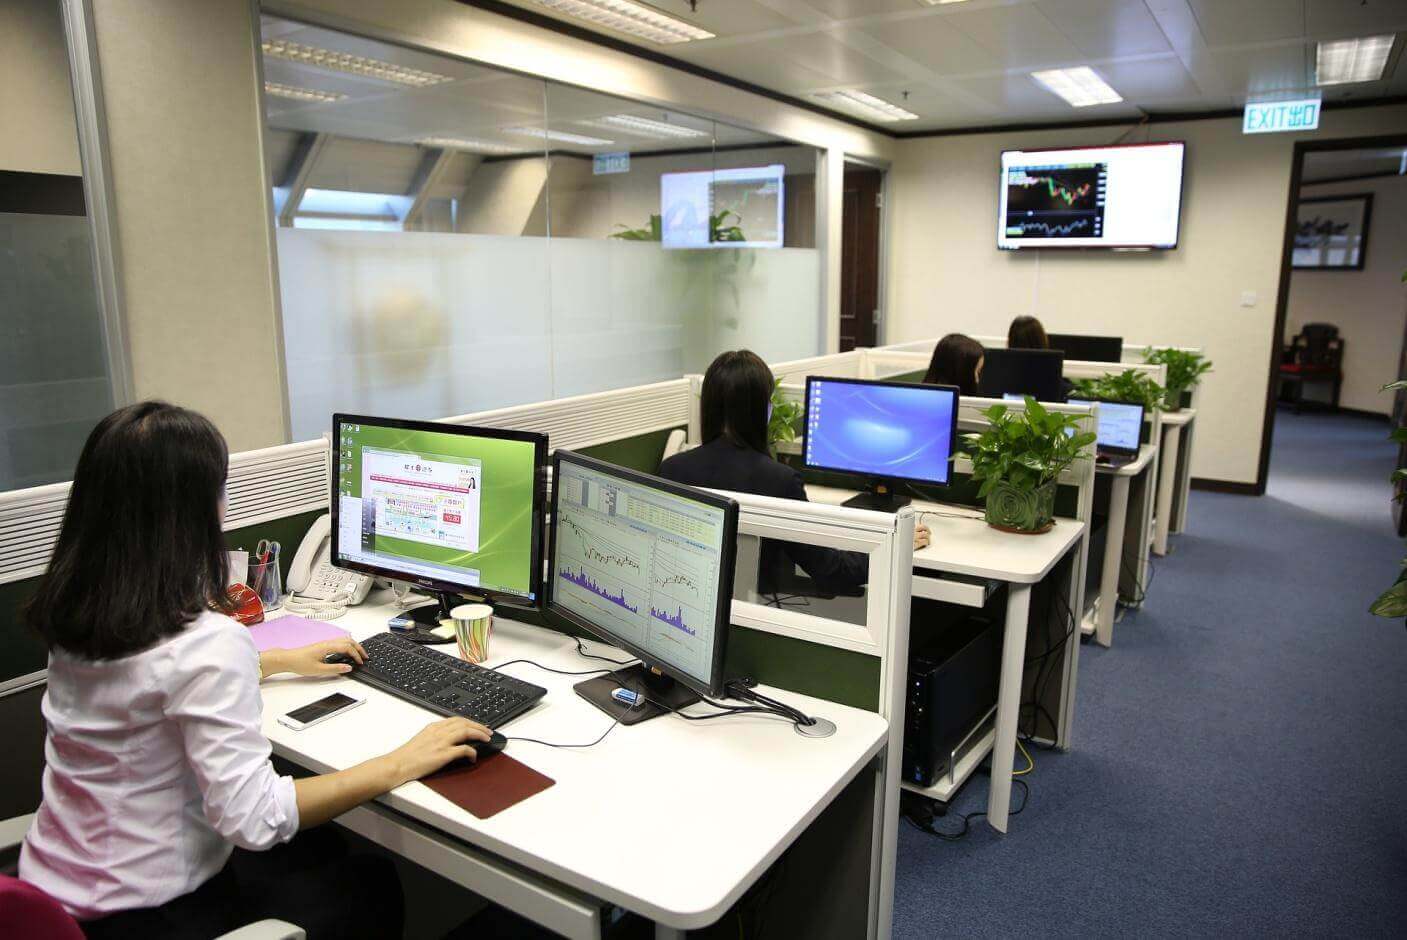 A group of professionals work alone at their desks